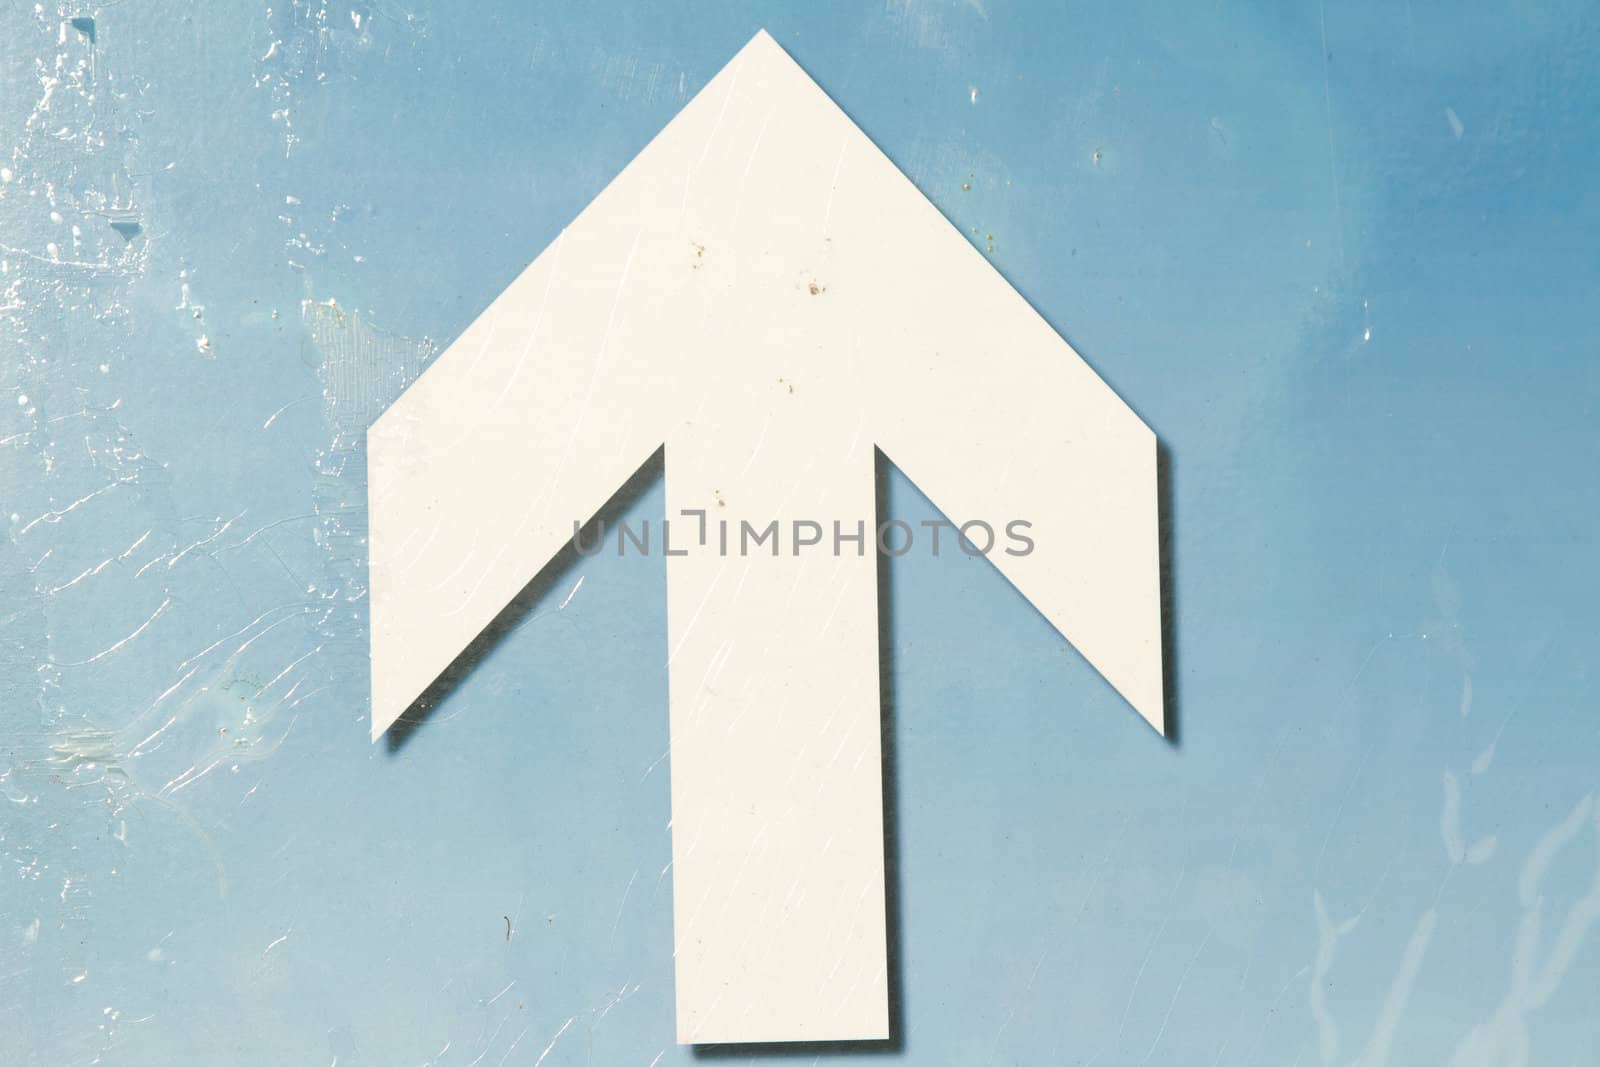 An arrow in white pointing up on a blue shiny background.